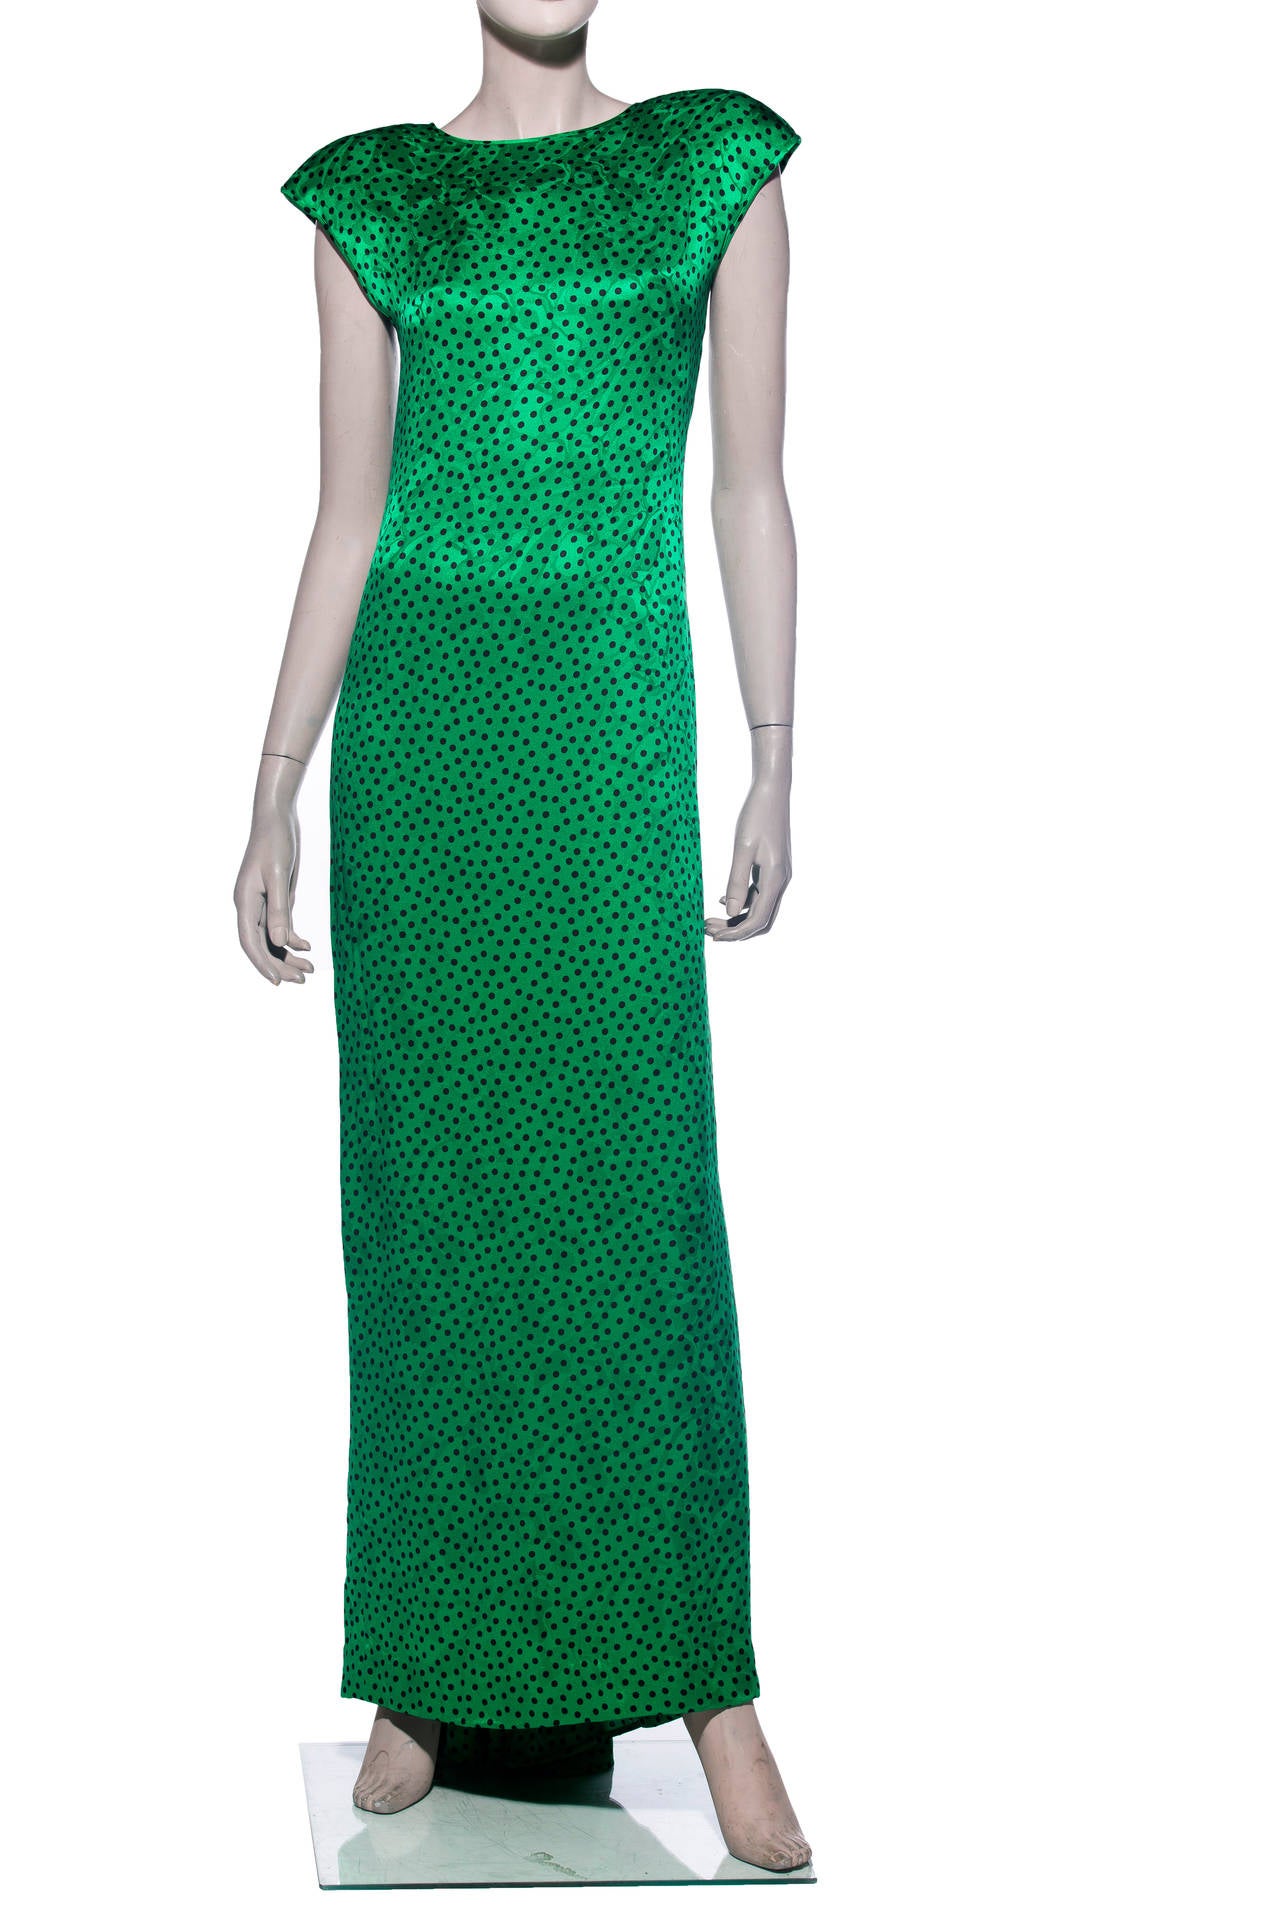 Valentino, circa 1980's emerald green silk gown with black polka dots, shoulder pads and side zip.